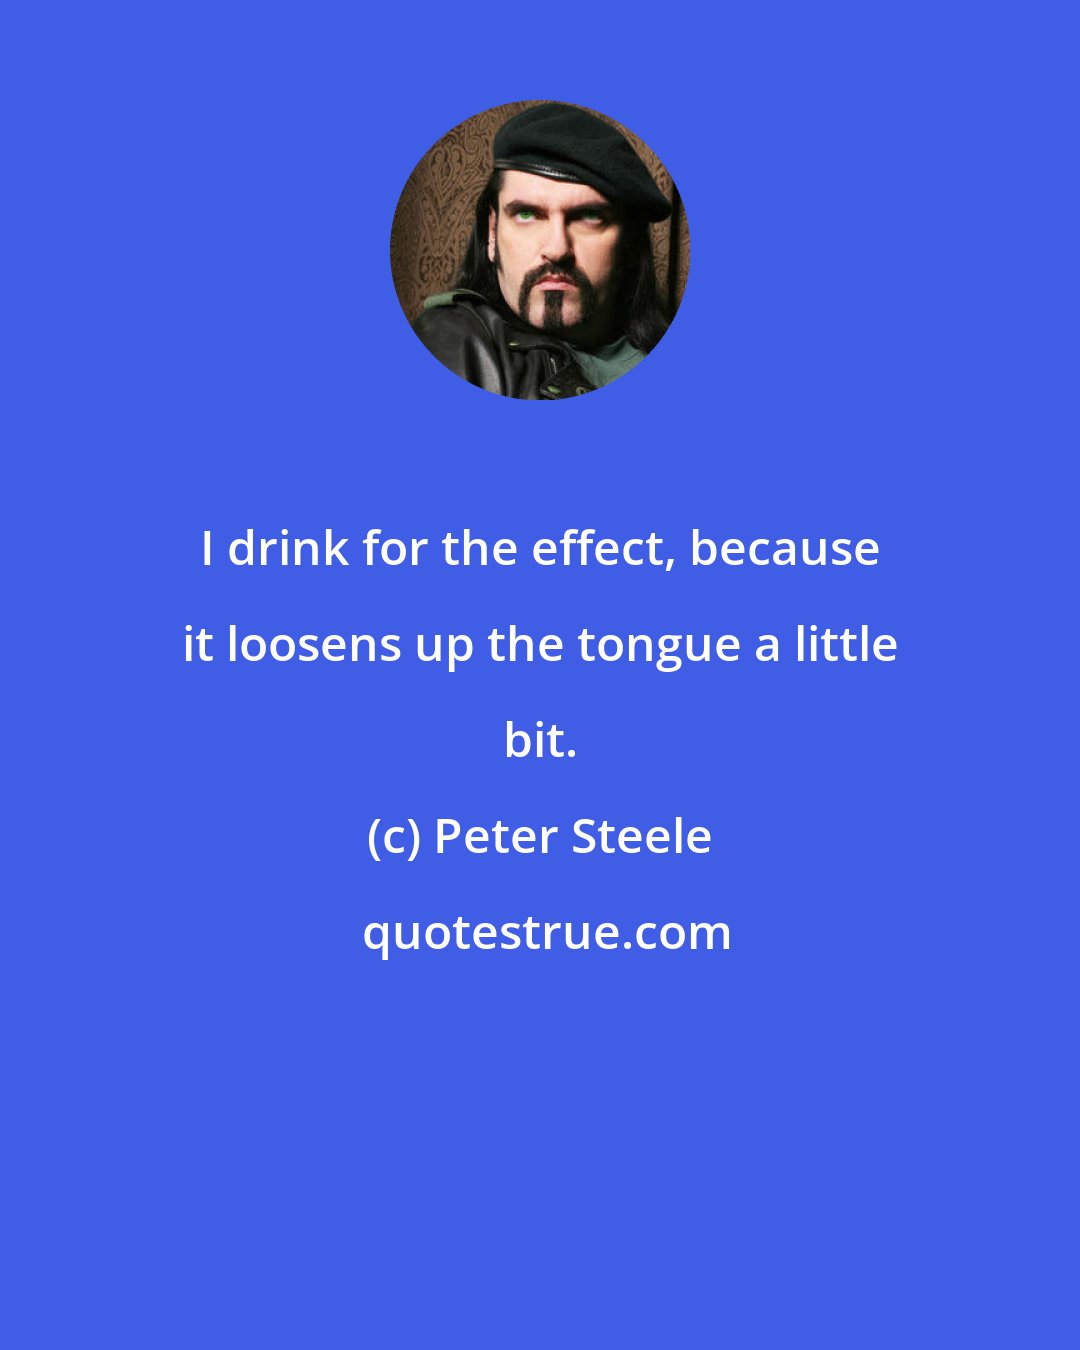 Peter Steele: I drink for the effect, because it loosens up the tongue a little bit.